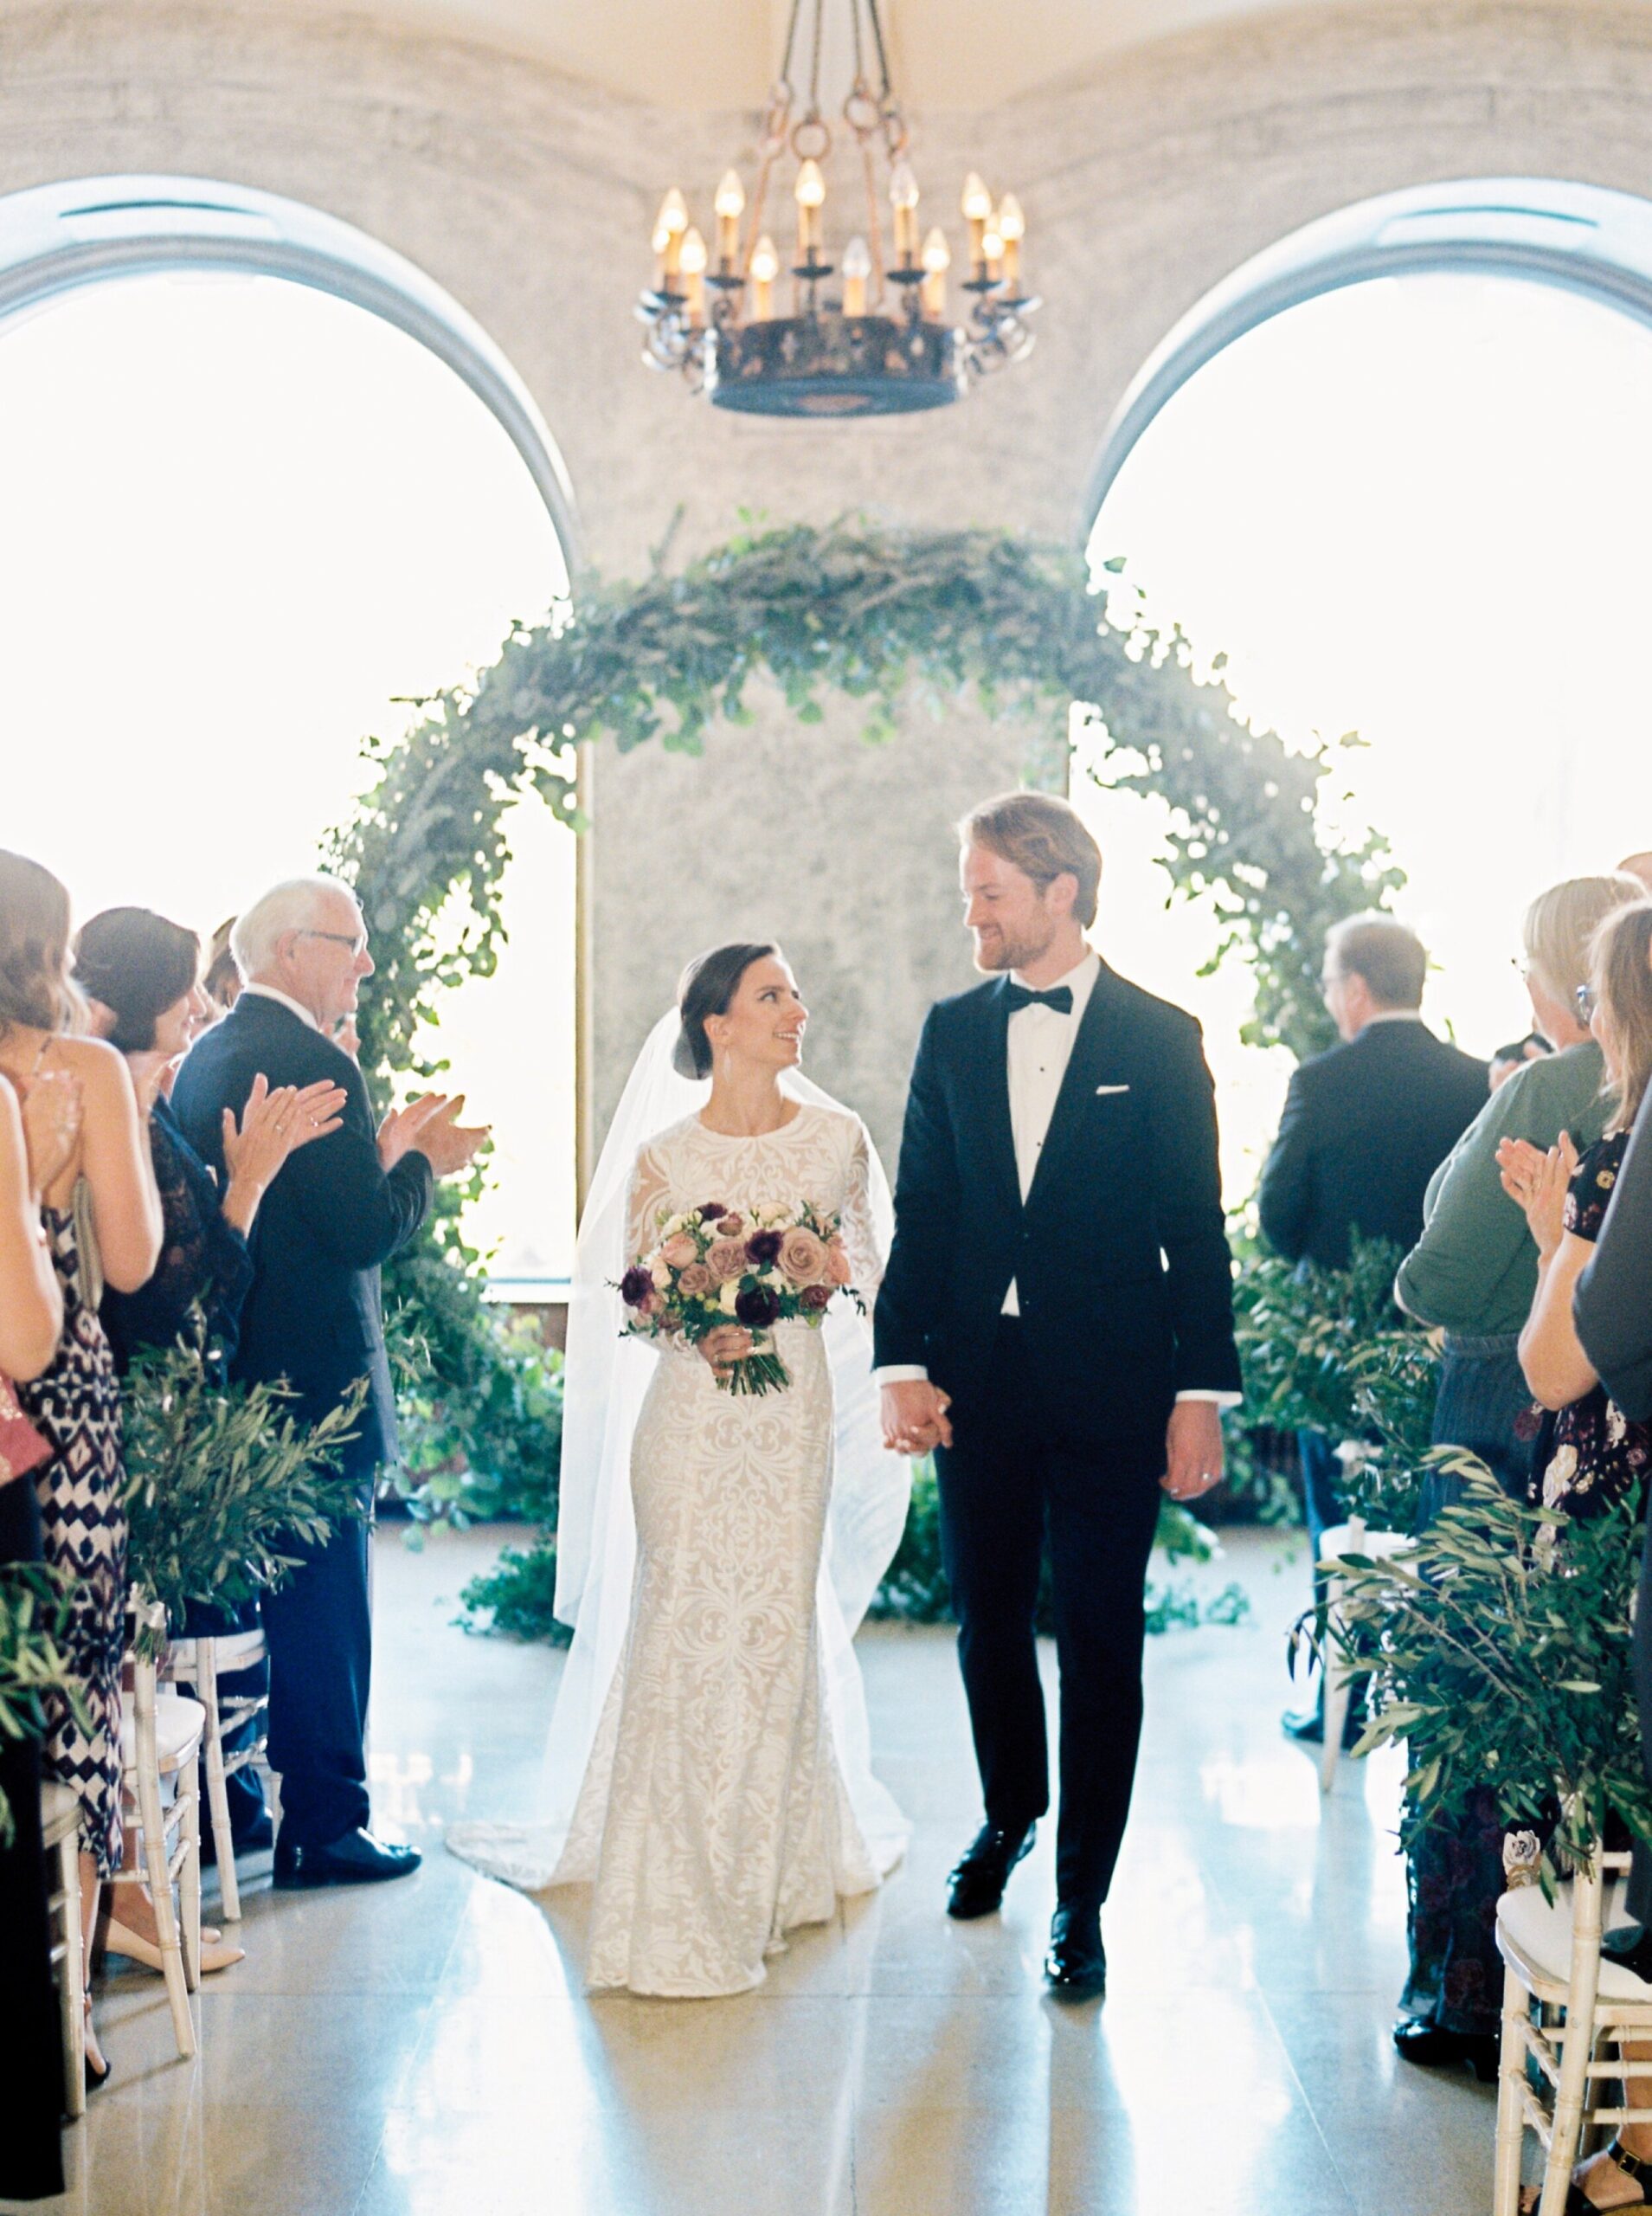  Wedding ceremony arches | infinity circle of greenery leaves and florals for the best wedding ceremony backdrop  at the banff springs hotel 